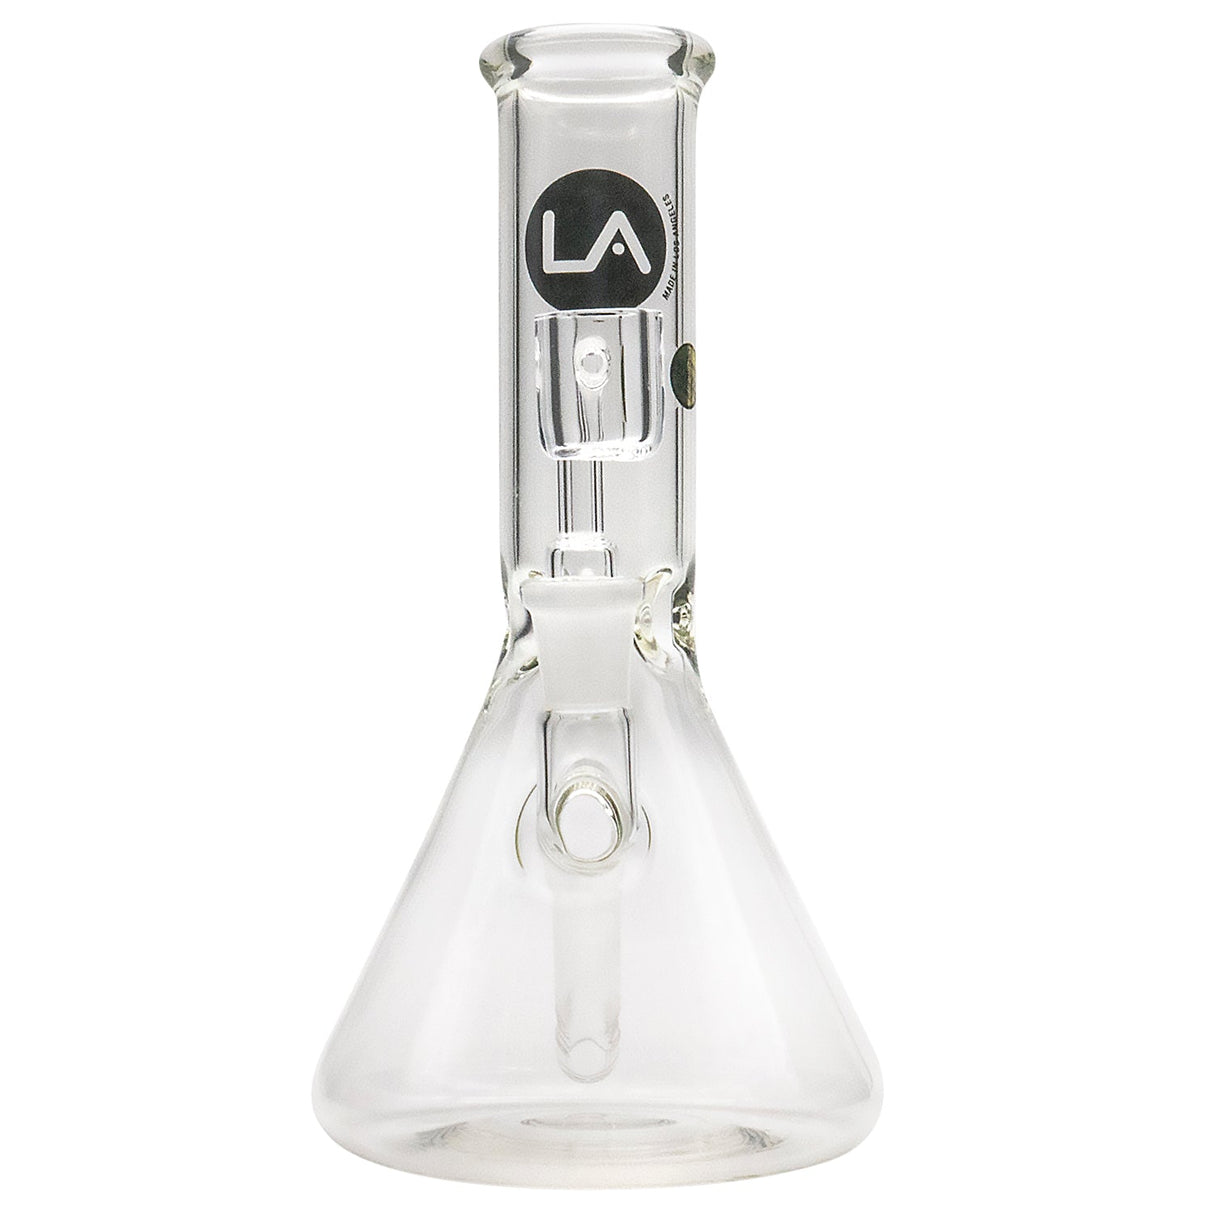 LA Pipes Classic Beaker Concentrate Rig with Quartz Banger Front View